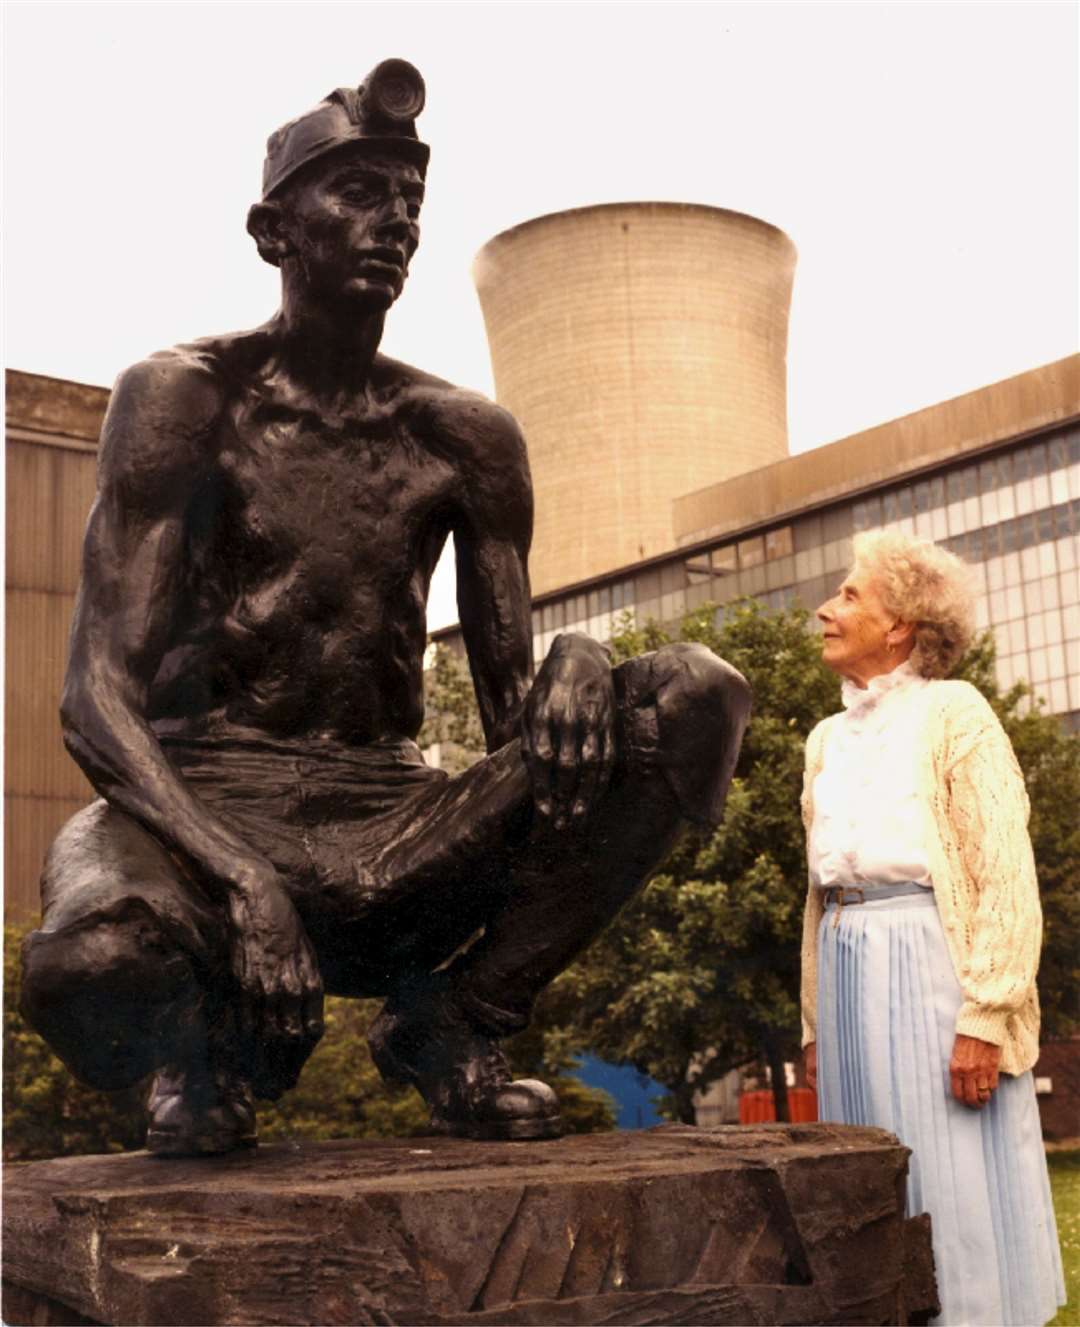 The statue was first placed at Richborough Power Station. Picture: Colin Varrall